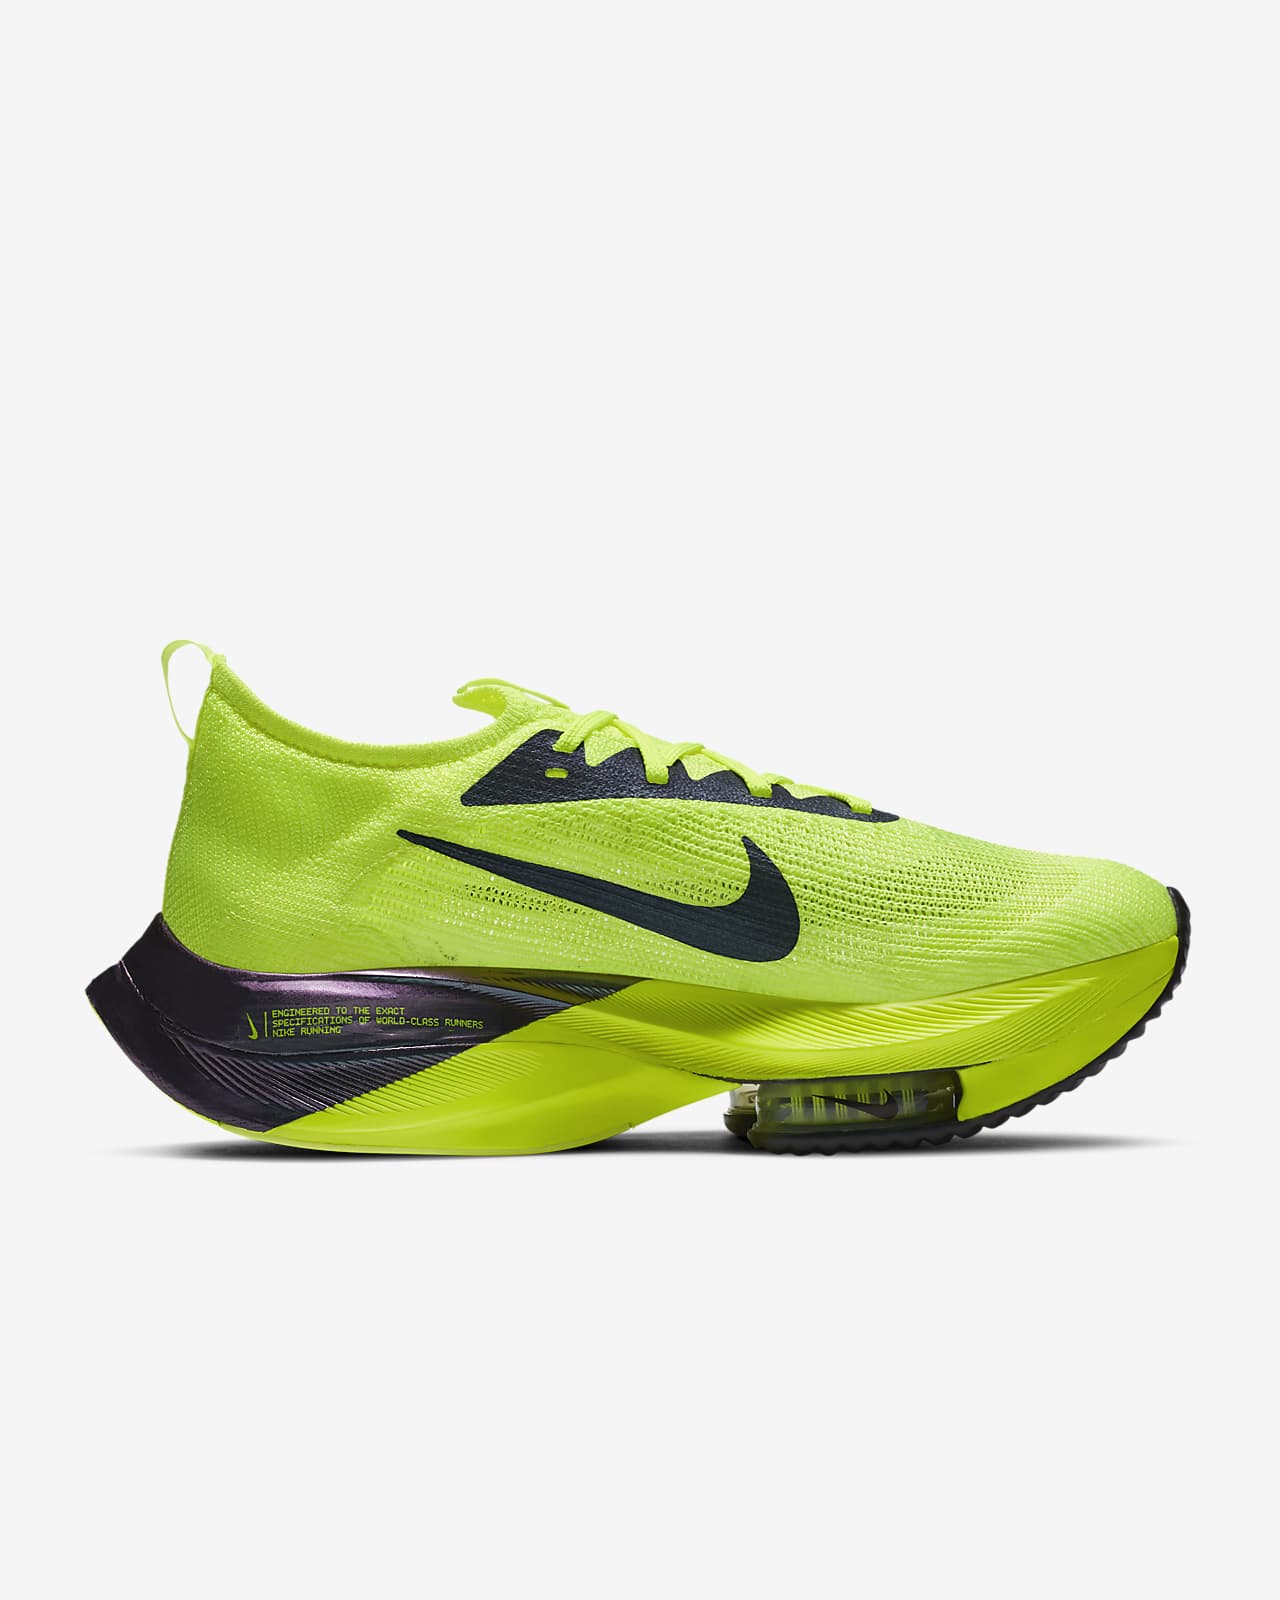 new nike running shoes alphafly